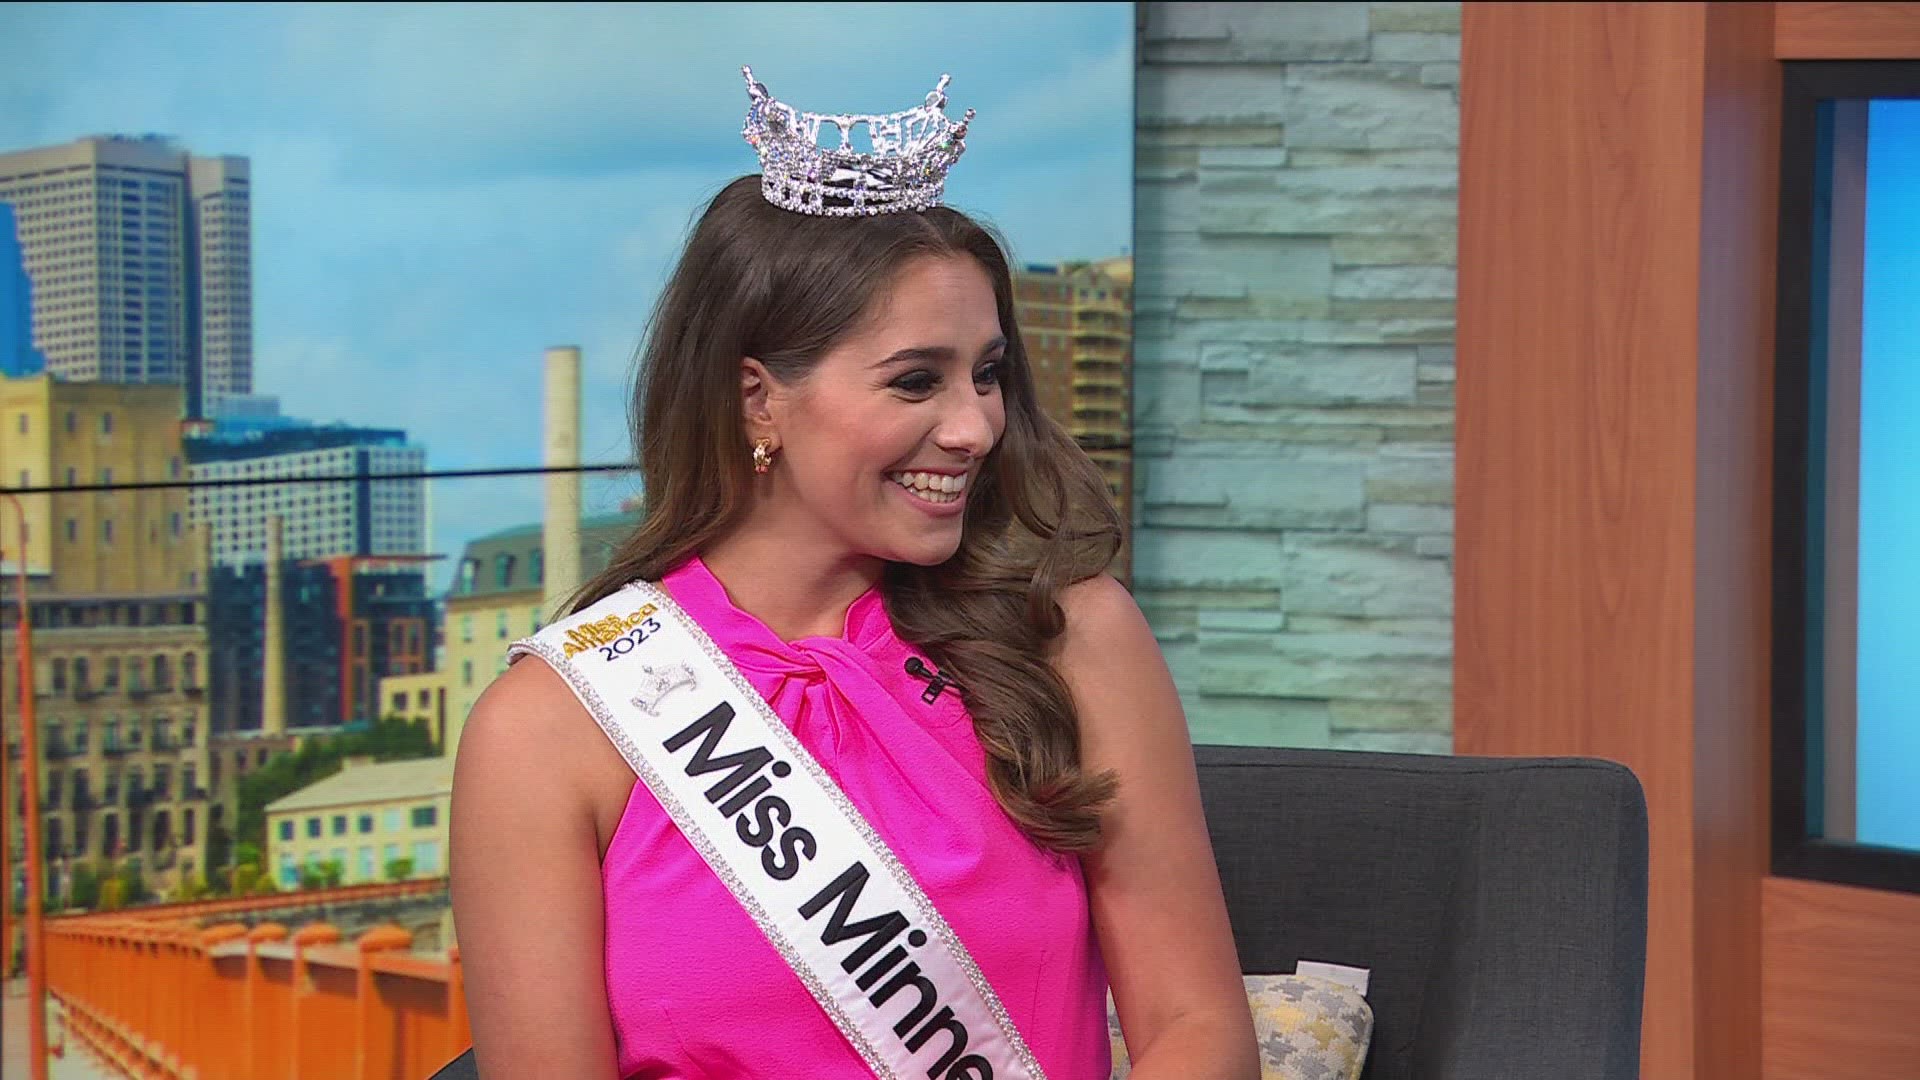 The newest Miss Minnesota has been crowned. Angelina Amerigo beat out 24 other hopefuls to take the title on Saturday.